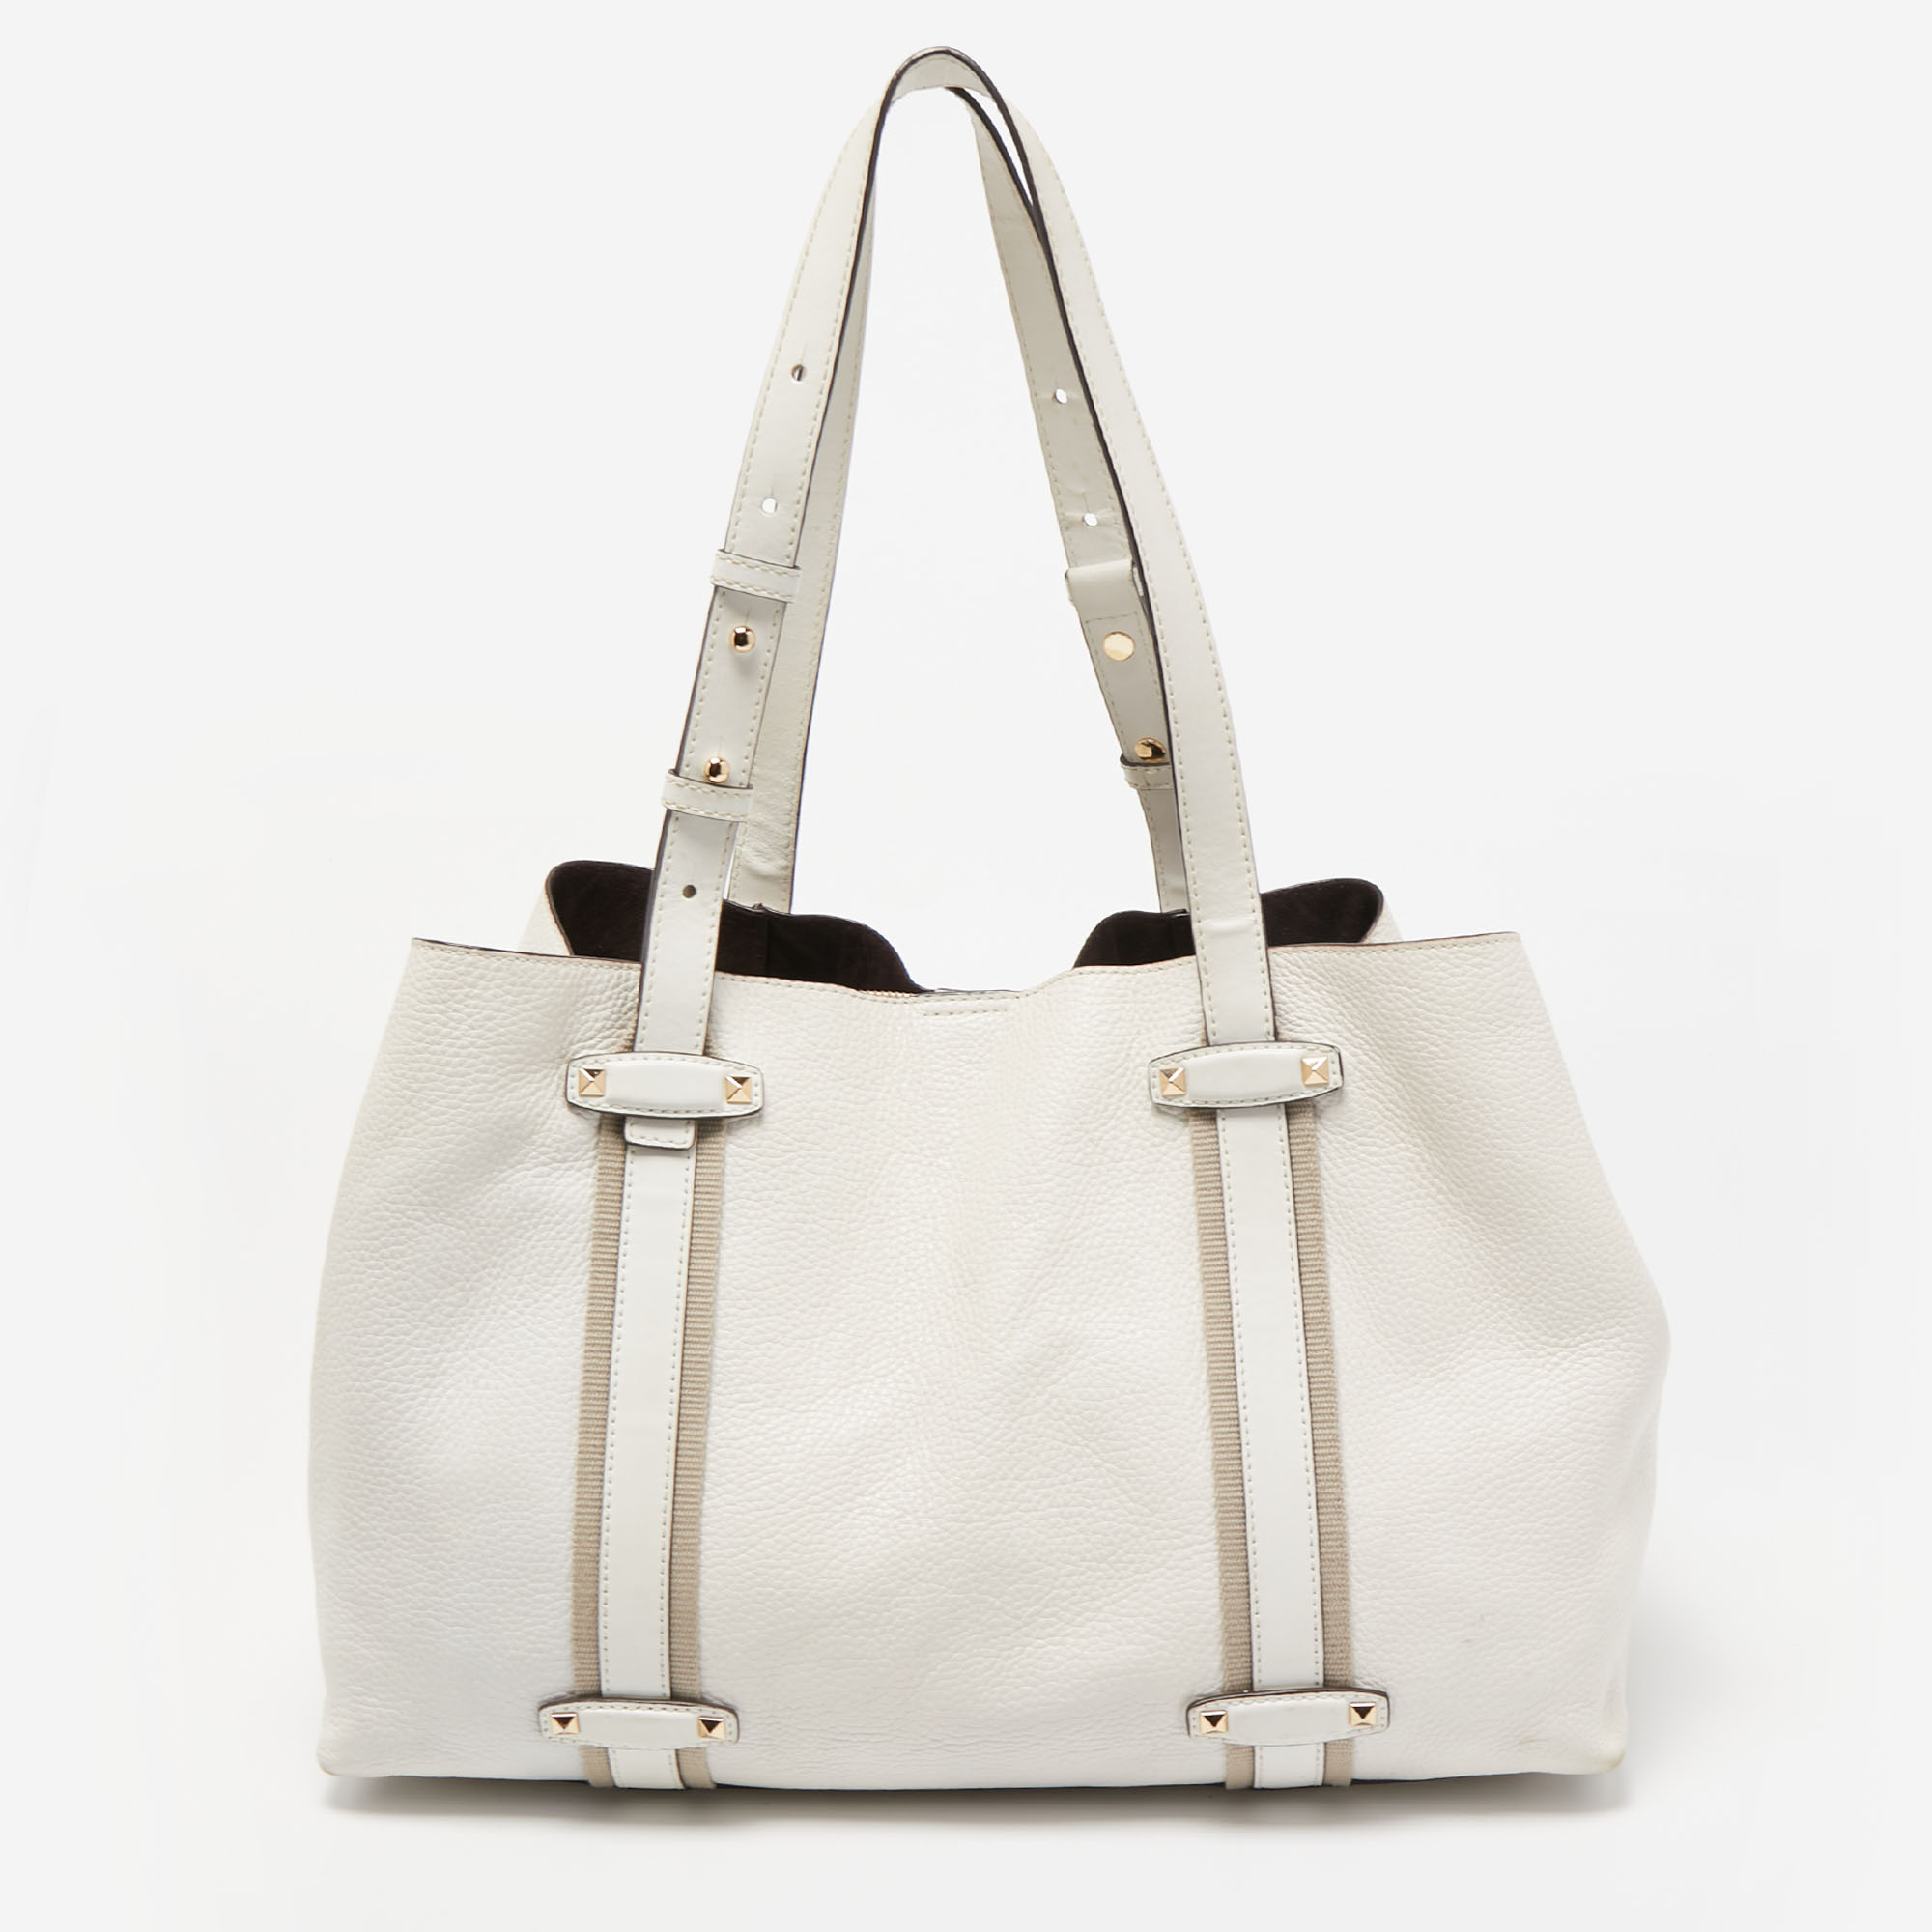 Michael Kors Off White Leather Travel Tote